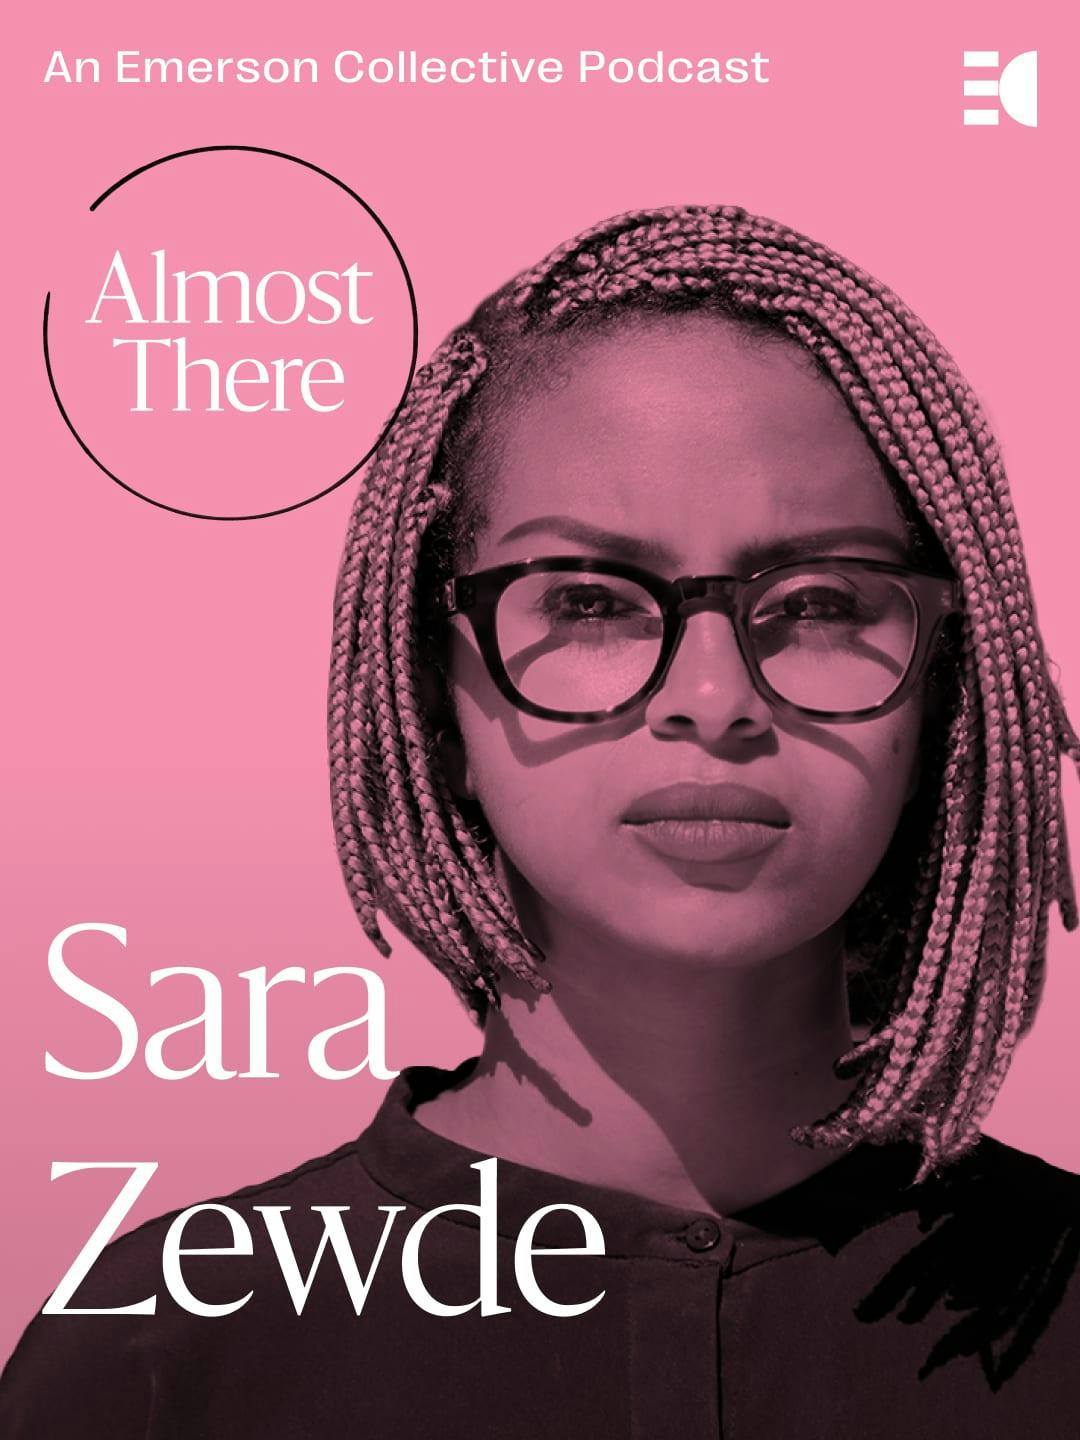 Sara Zewde portrait with text: Almost There